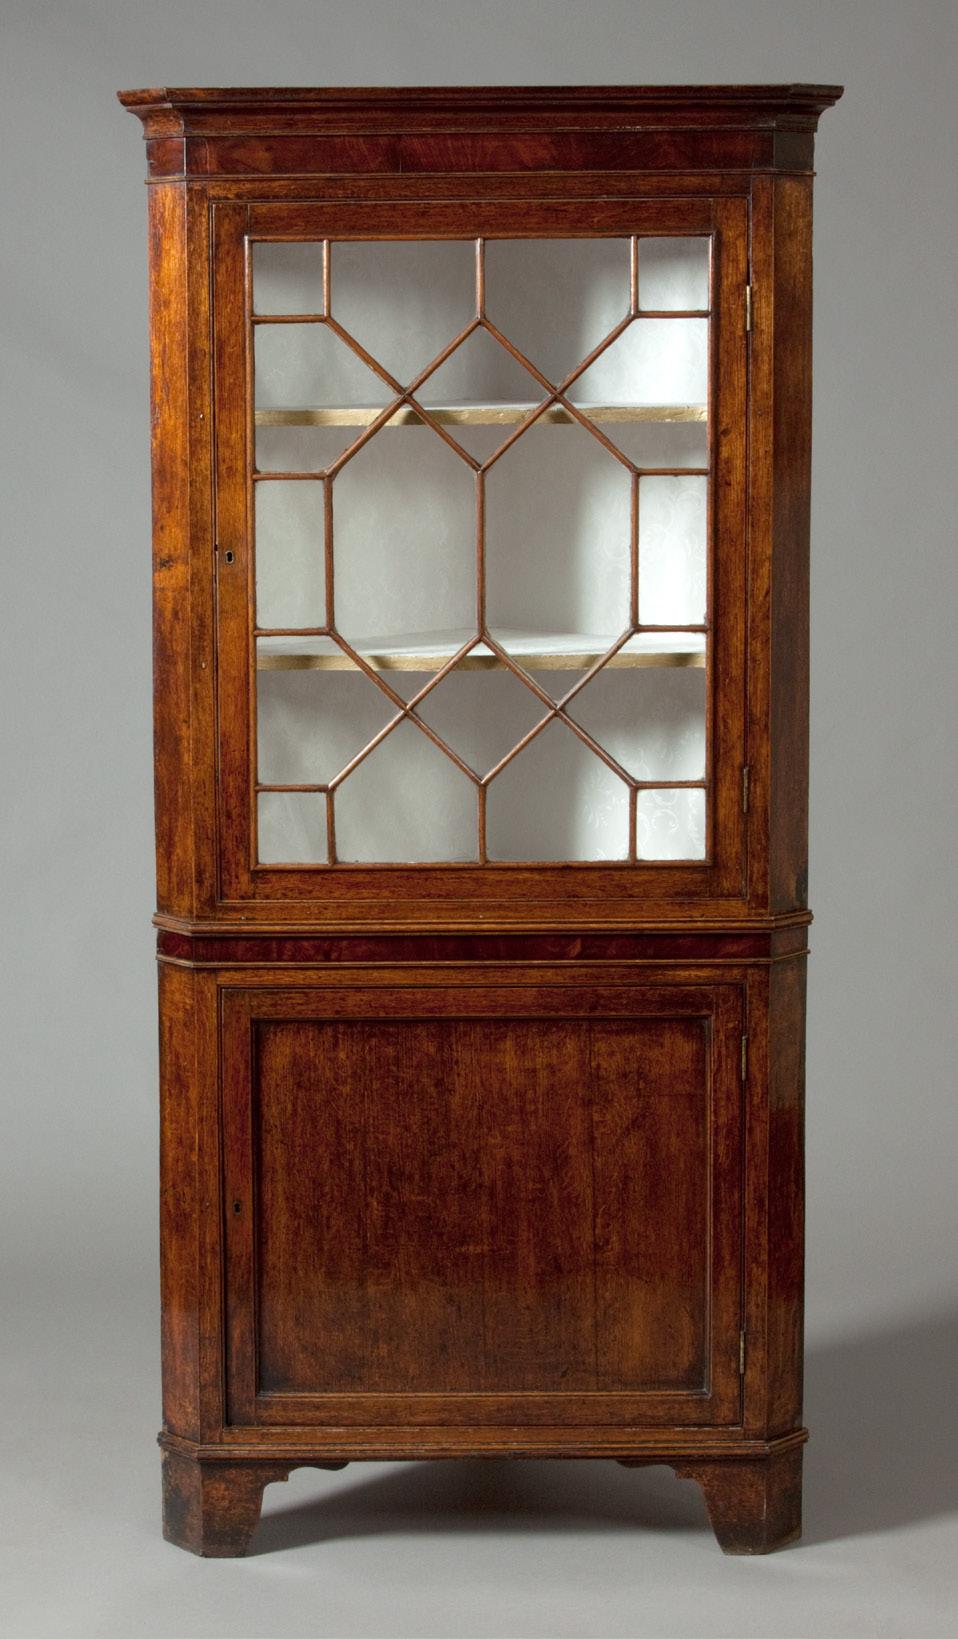 4 Small corner cupboard 1350 Cwpwrdd cornel bychan A Welsh corner cupboard, which is made from oak with a cross banded mahogany frieze above both the single astragal glazed door and